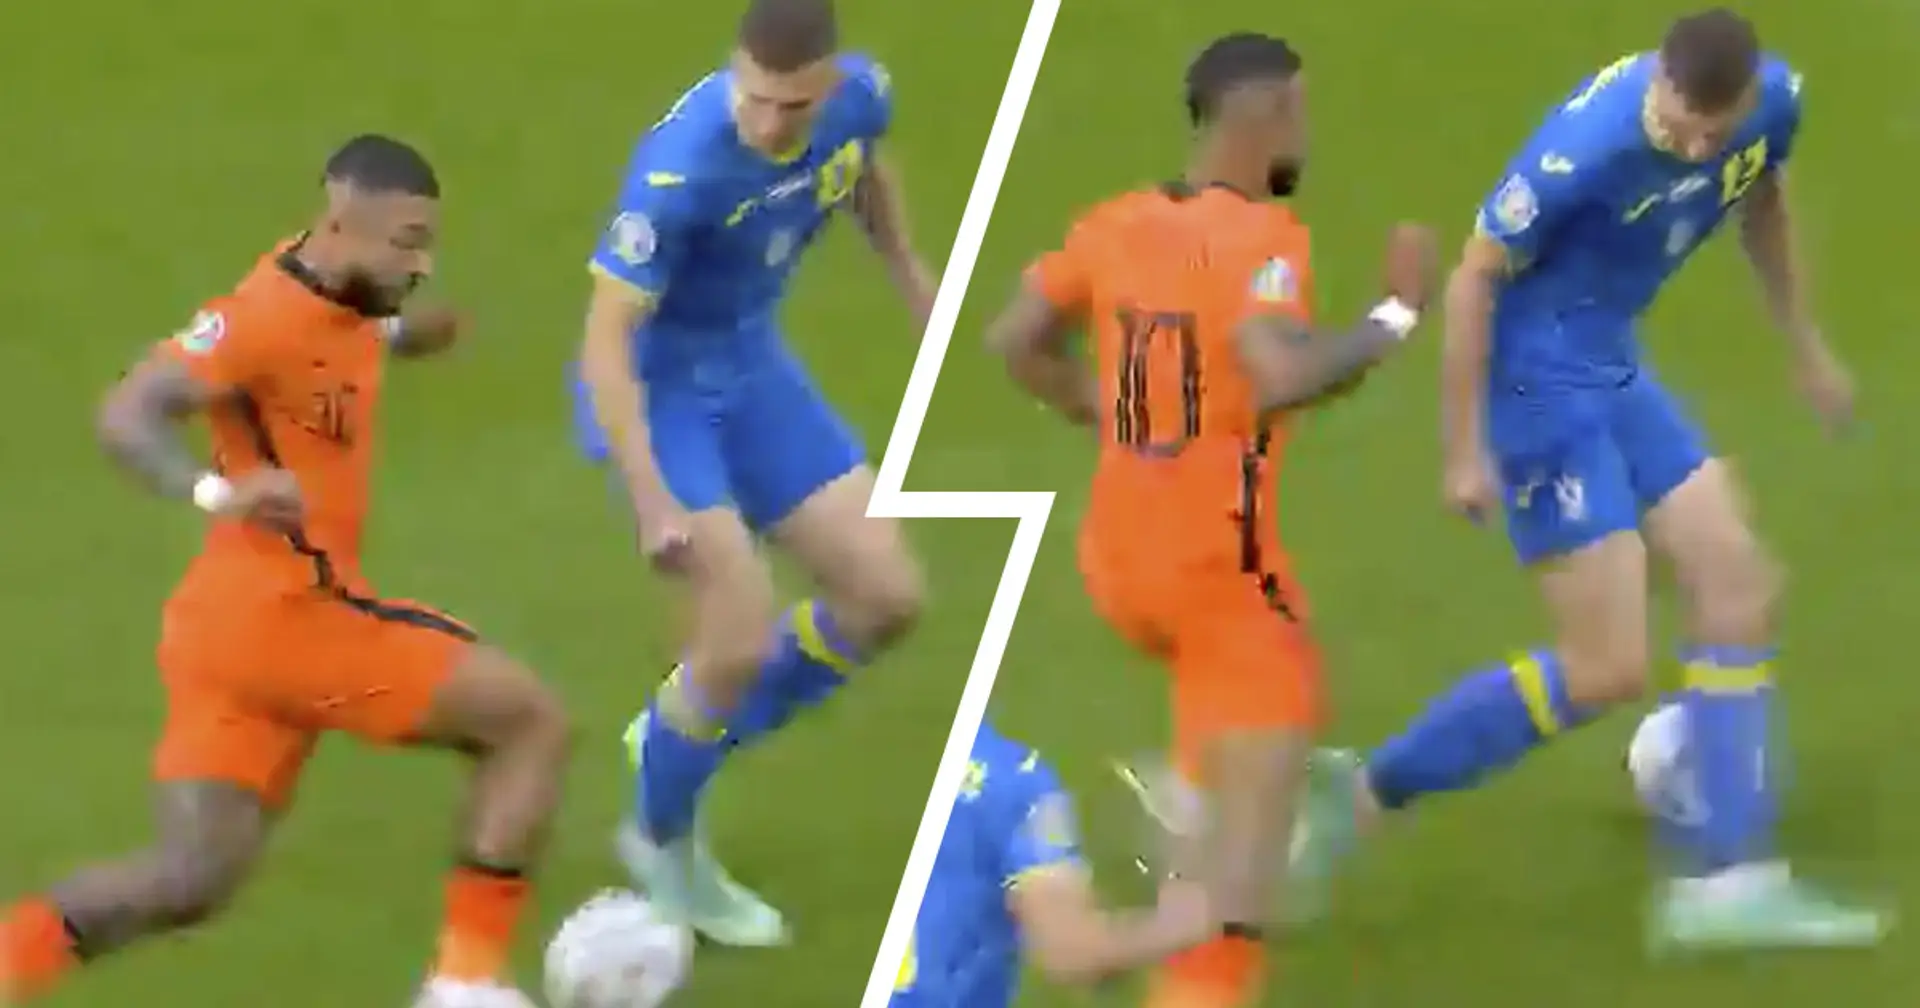 Depay's inch-perfect nutmeg wins Skill of the Day as Netherlands beat Ukraine